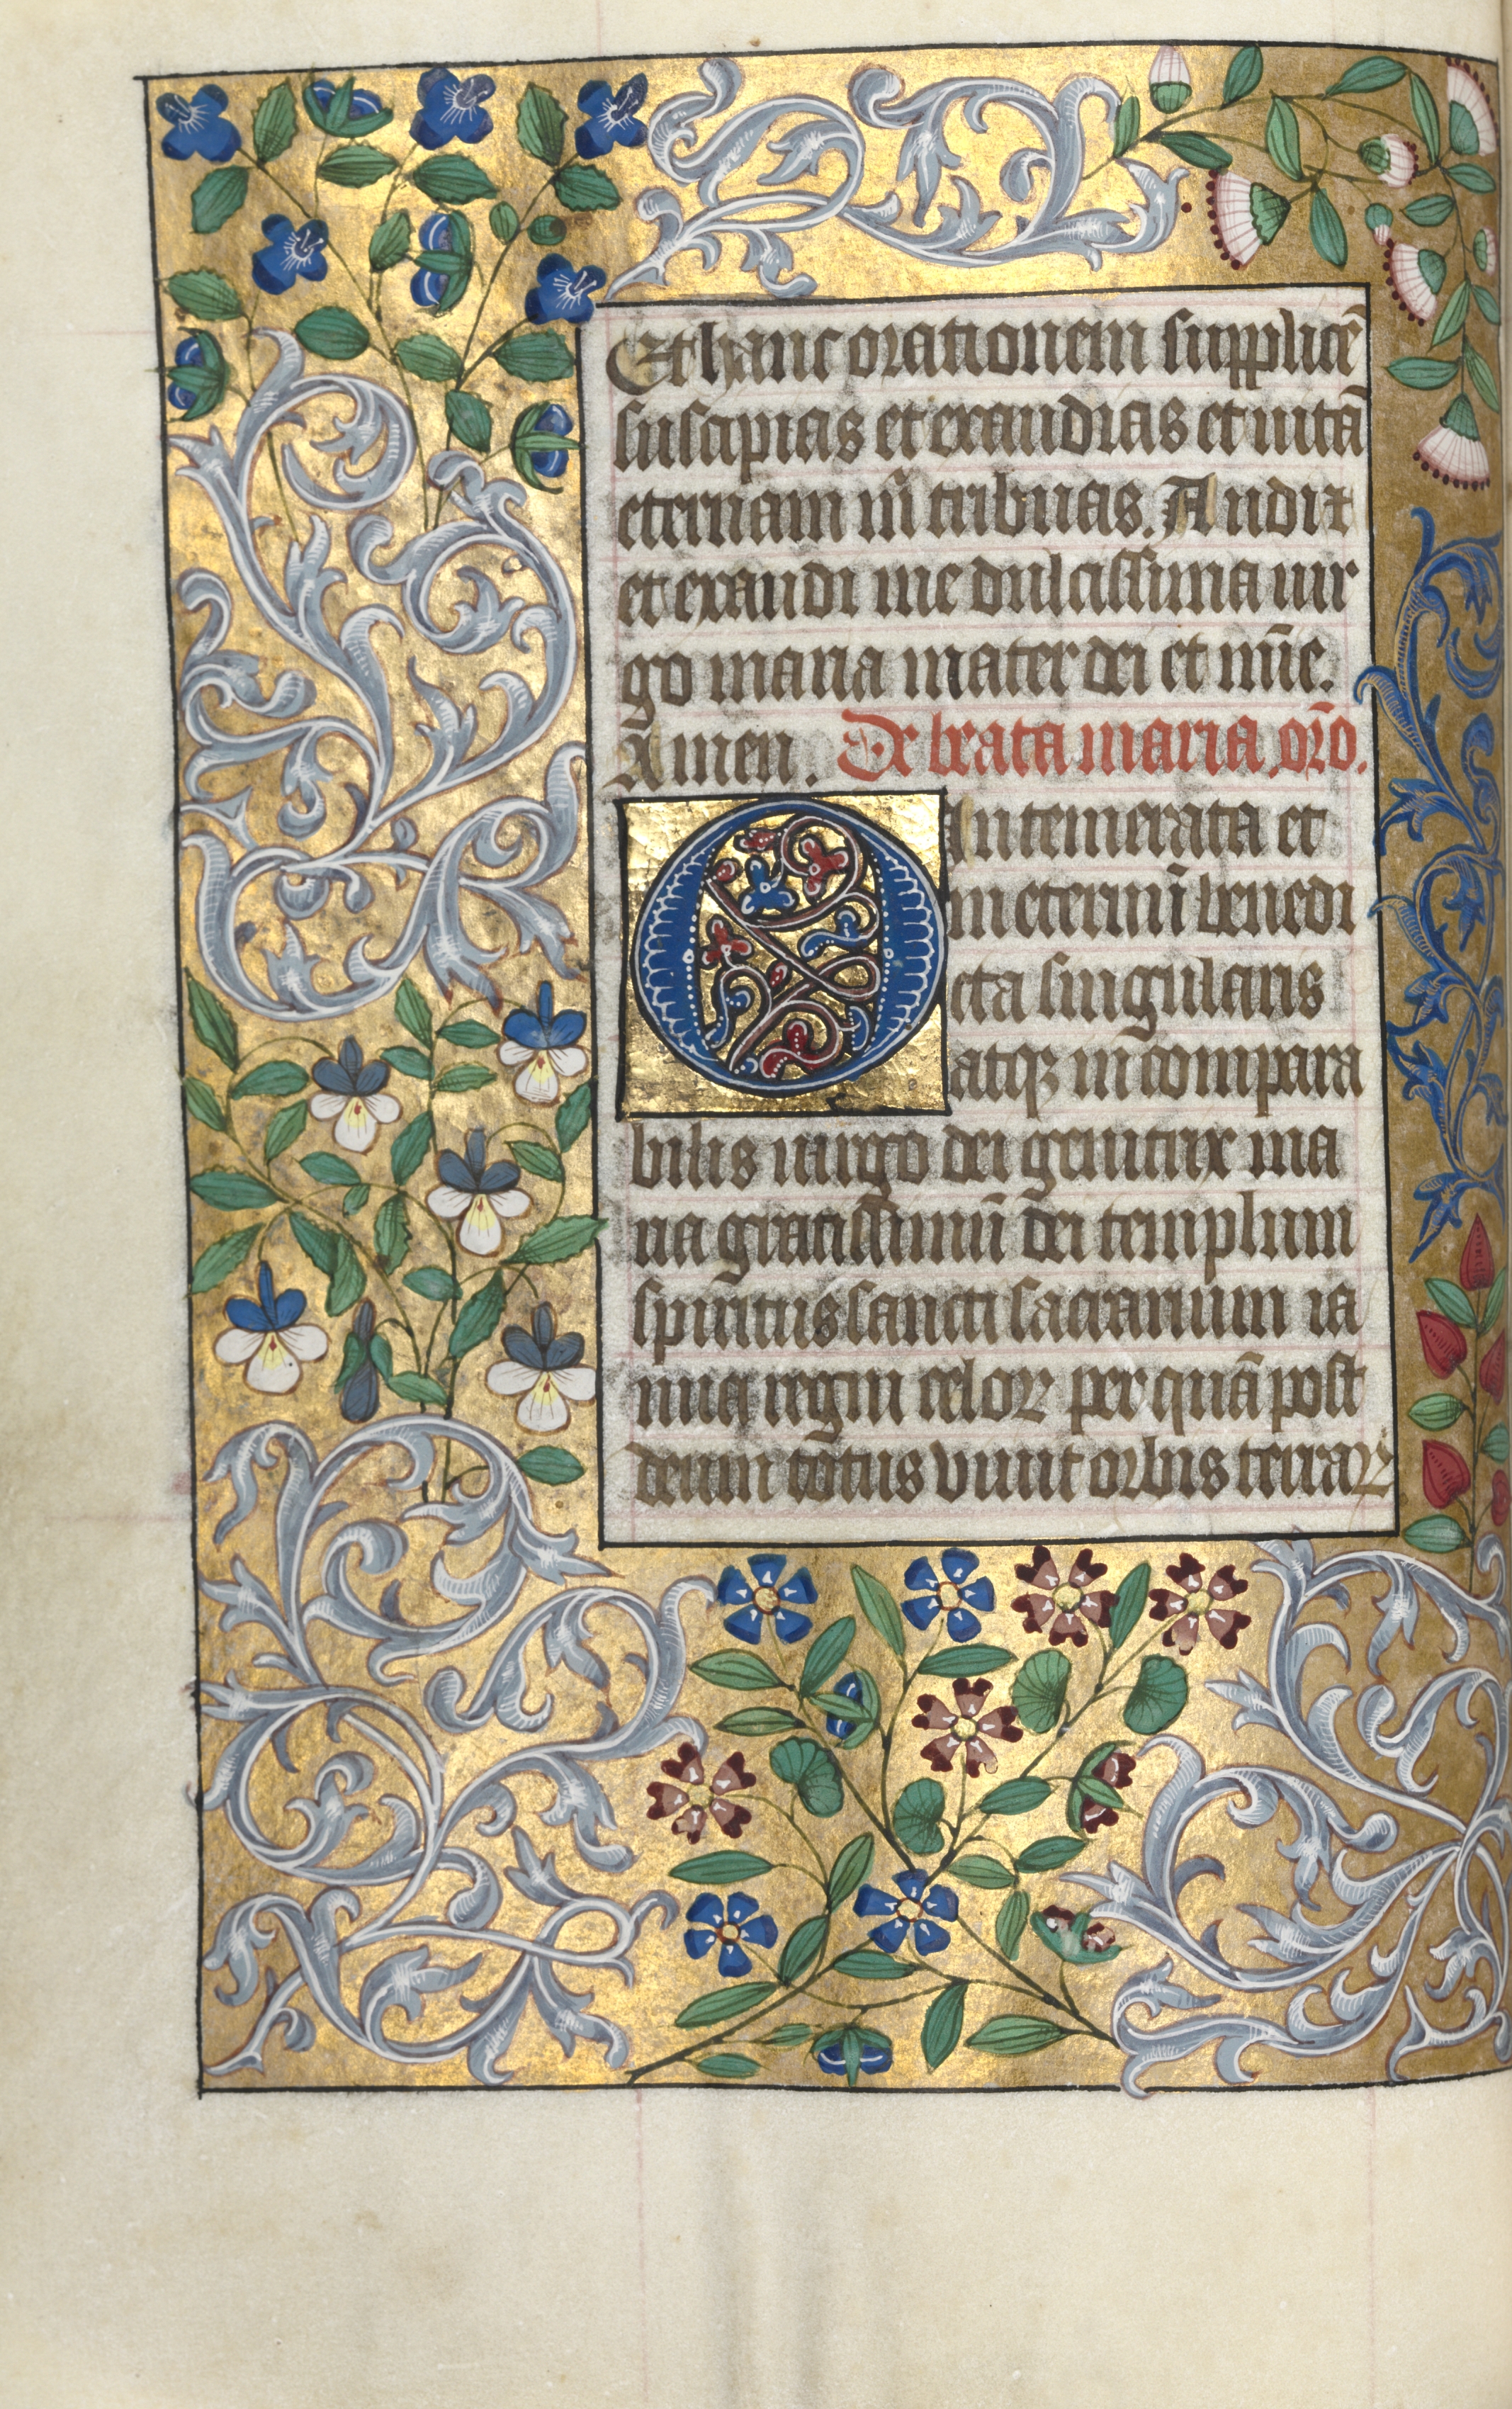 Book of Hours (Use of Rouen): fol. 22v, Prayer to the Virgin, Large Initial O with Elaborate Border